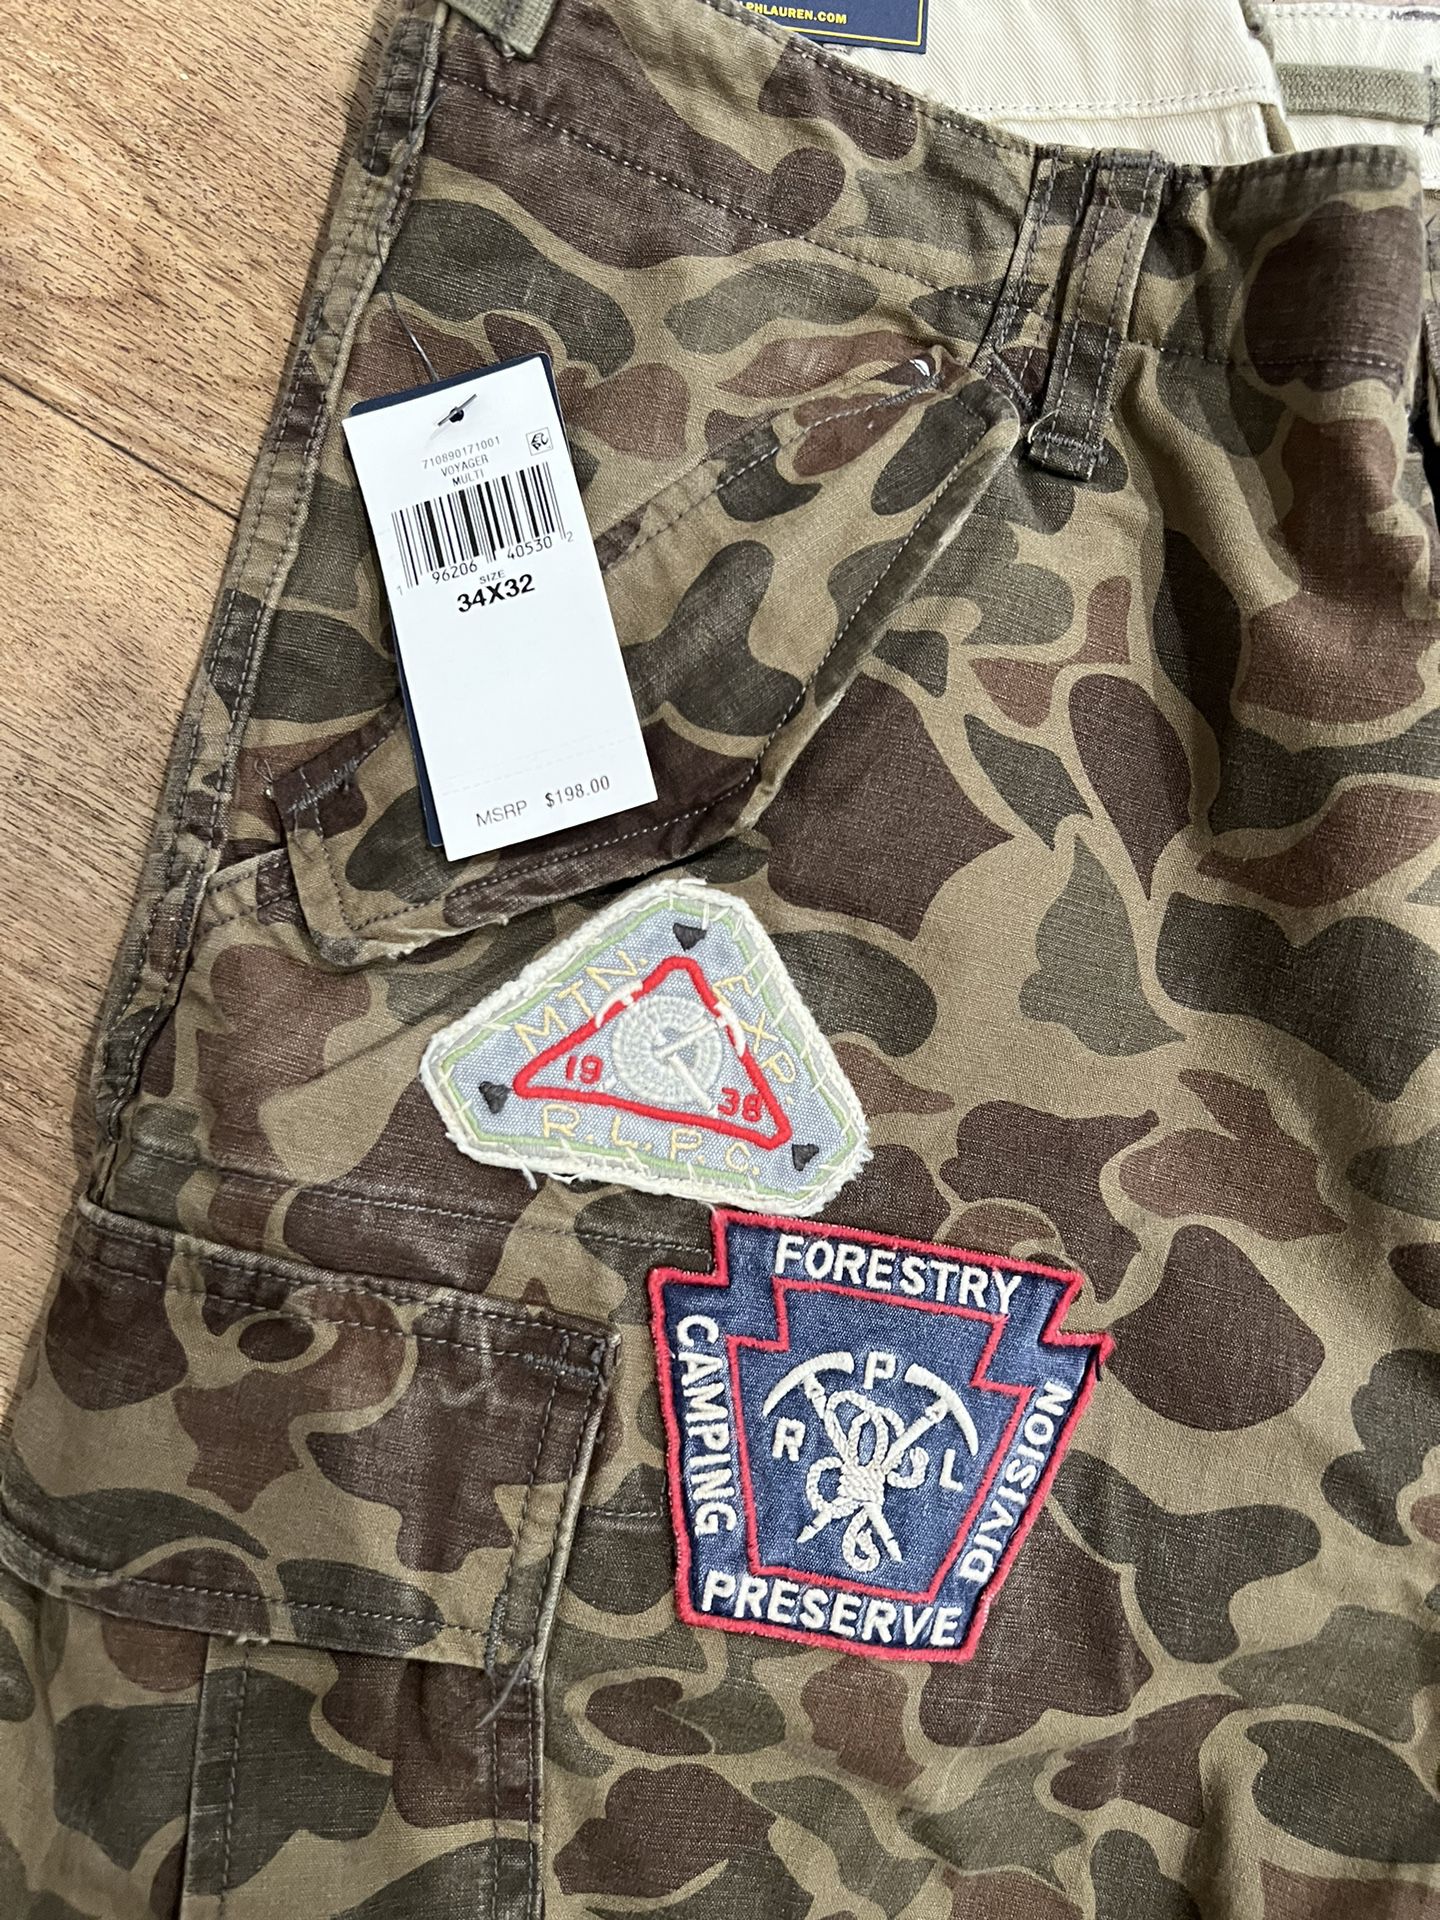 Vans Camo Pants - Size 33L x 34L for Sale in Brentwood, CA - OfferUp